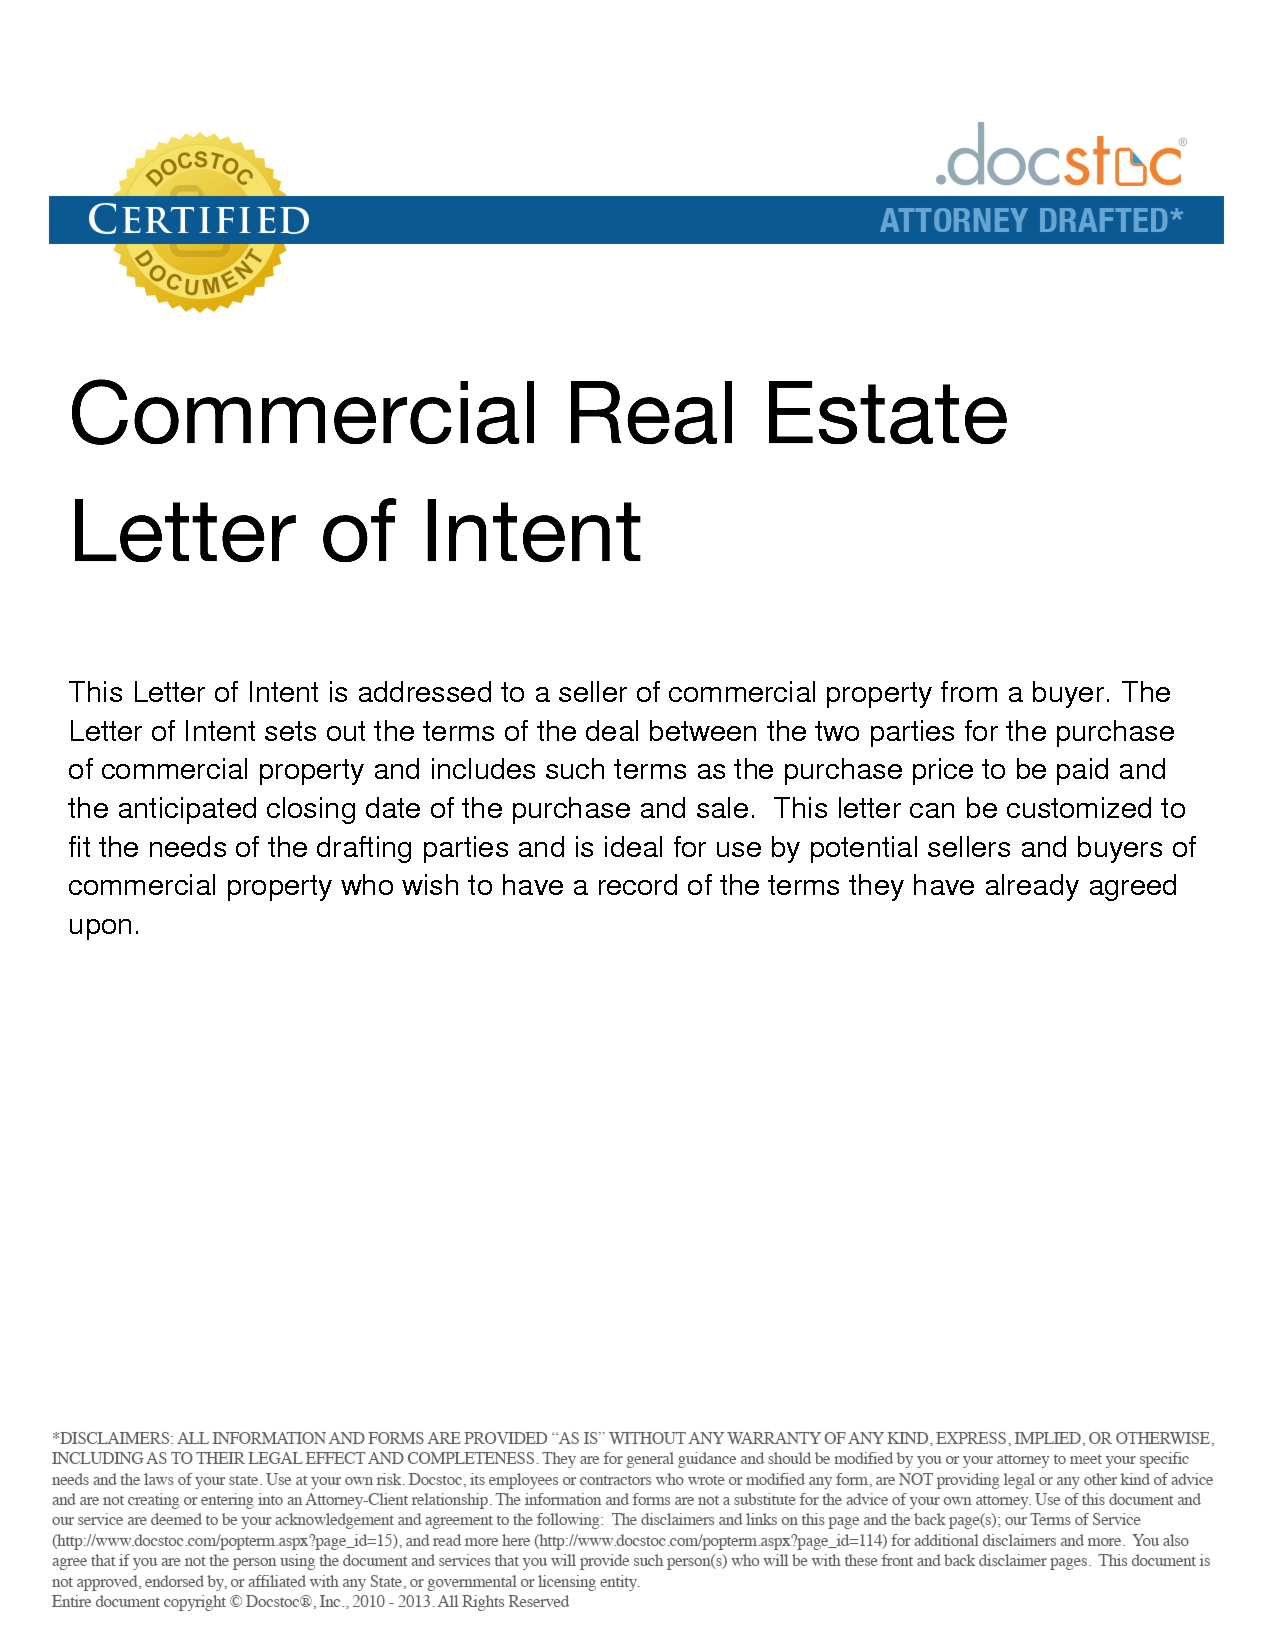 Letter Of Intent to Purchase Template - Sample Letter Intent Purchase Real Estate Best S Property